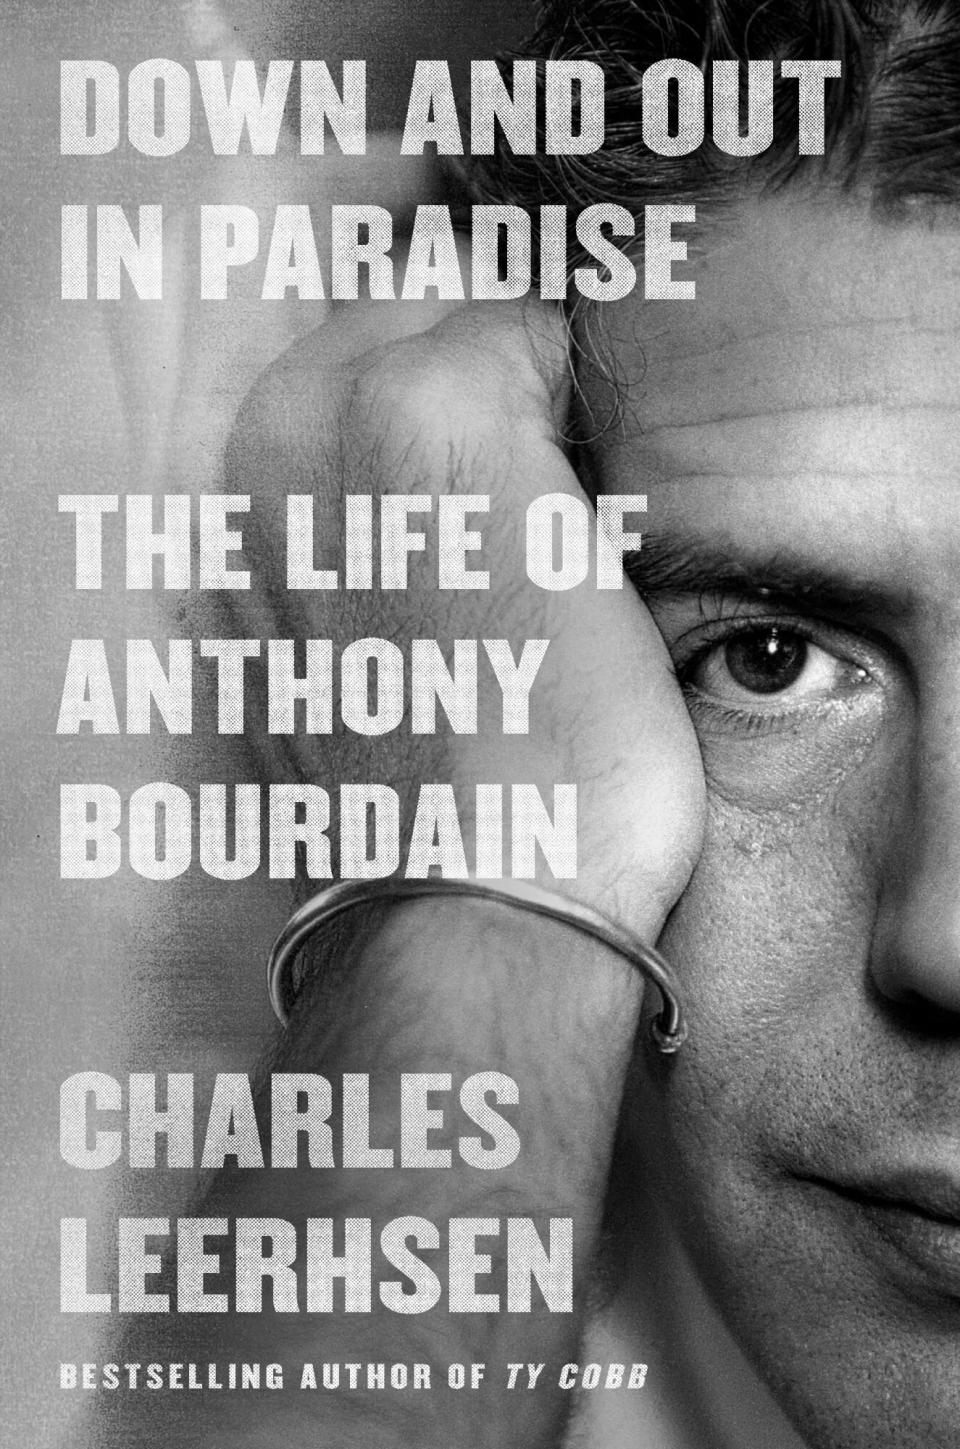 Down and Out in Paradise by Charles Leerhsen